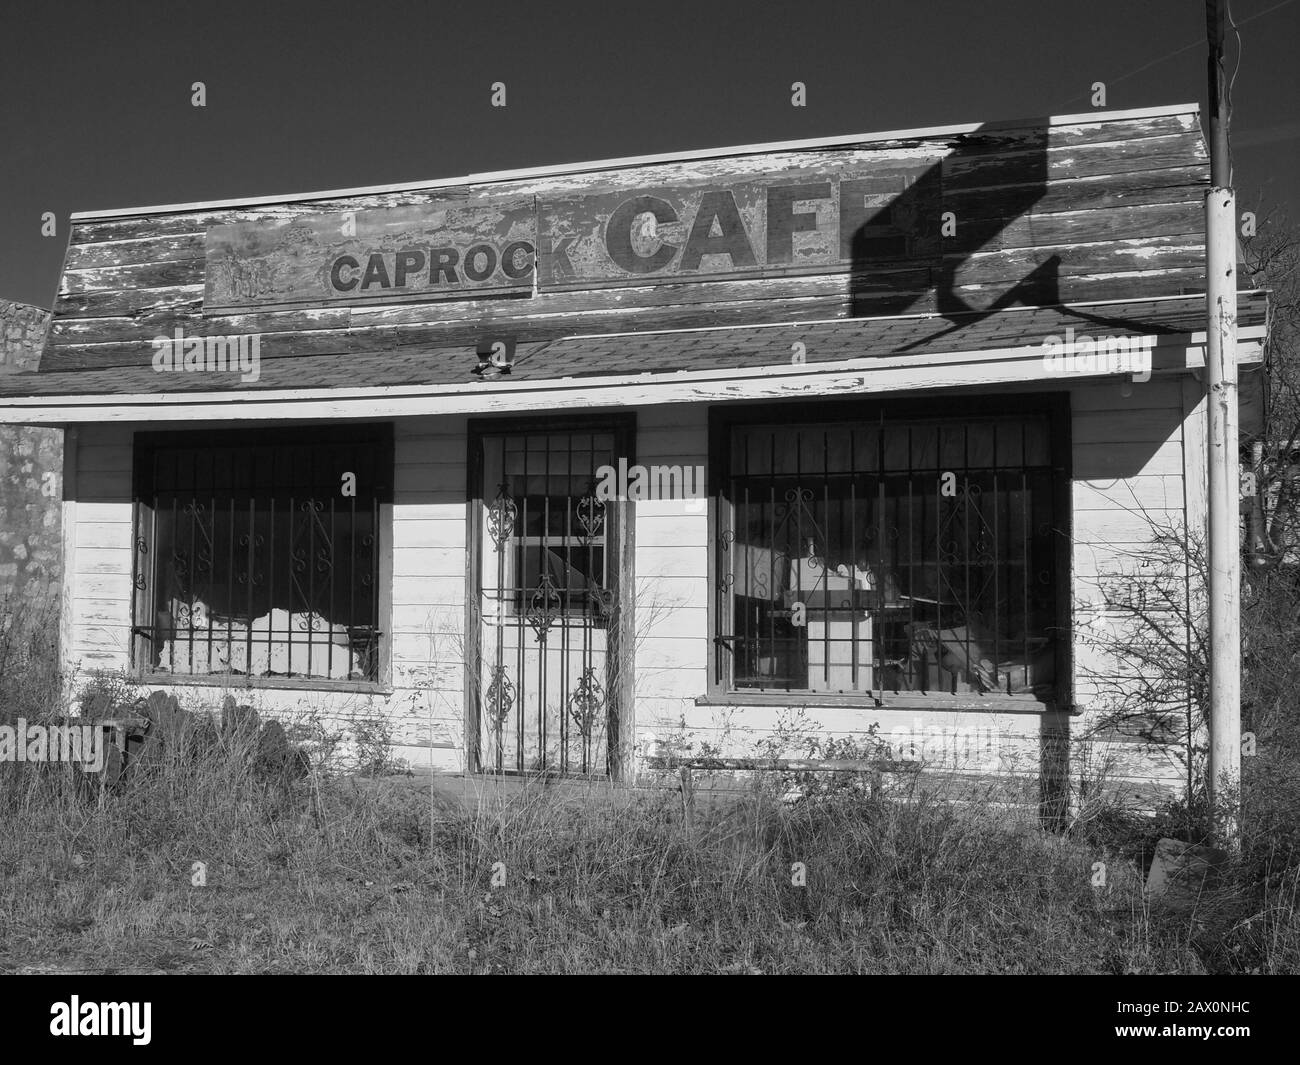 Small West Texas towns along US highway 180/62. Time seems to have bypassed this little places leaving them in suspended in the past. Stock Photo